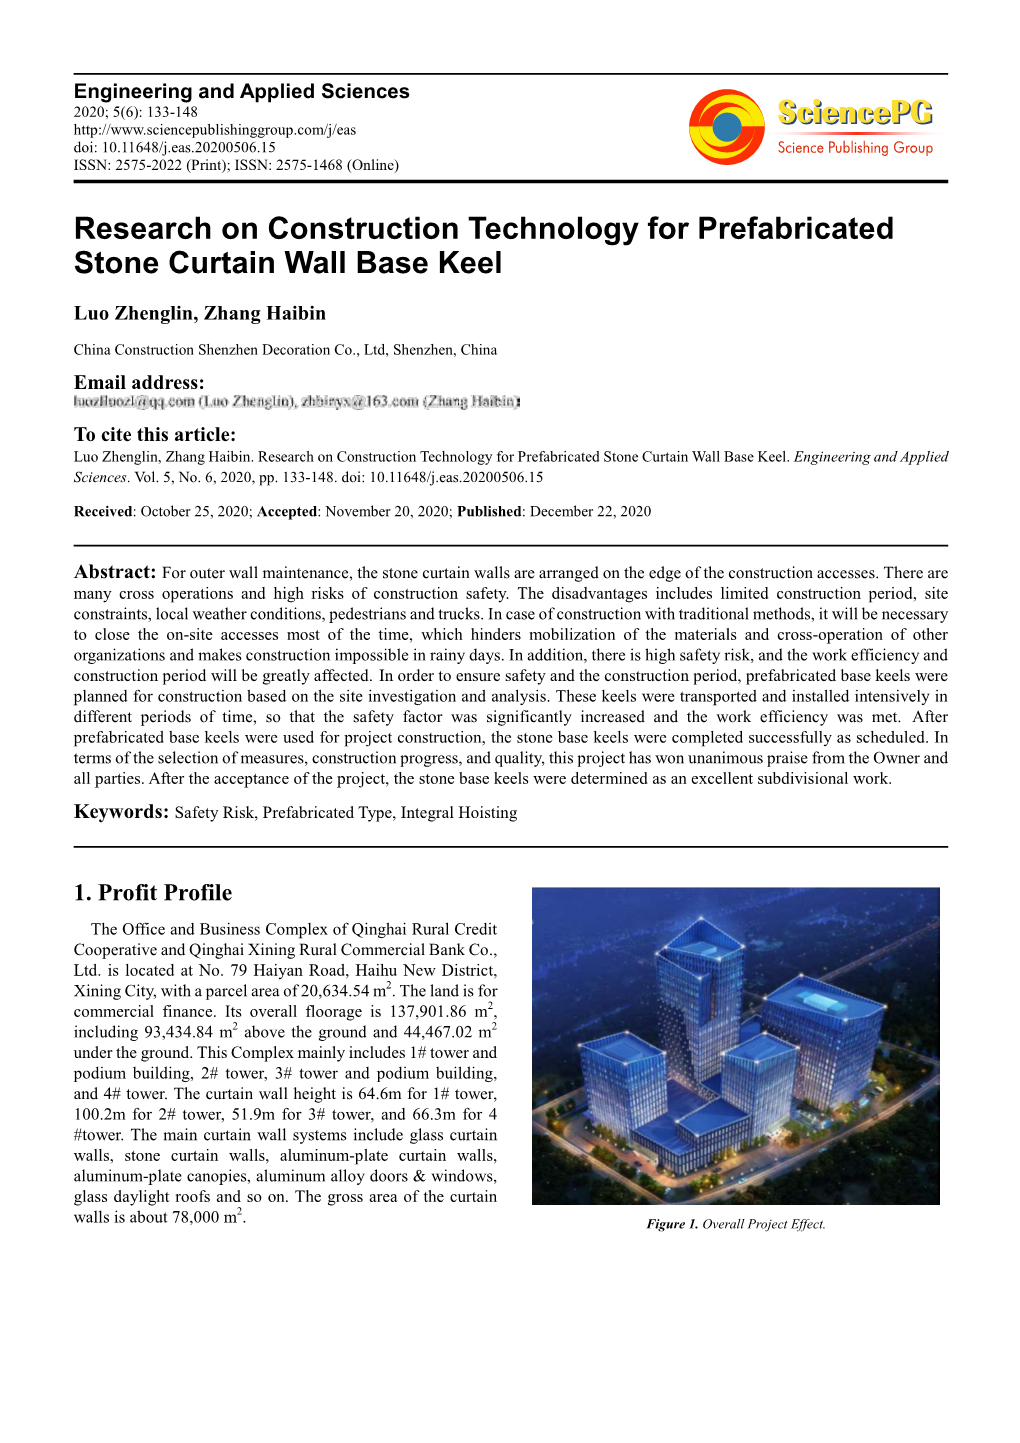 Research on Construction Technology for Prefabricated Stone Curtain Wall Base Keel